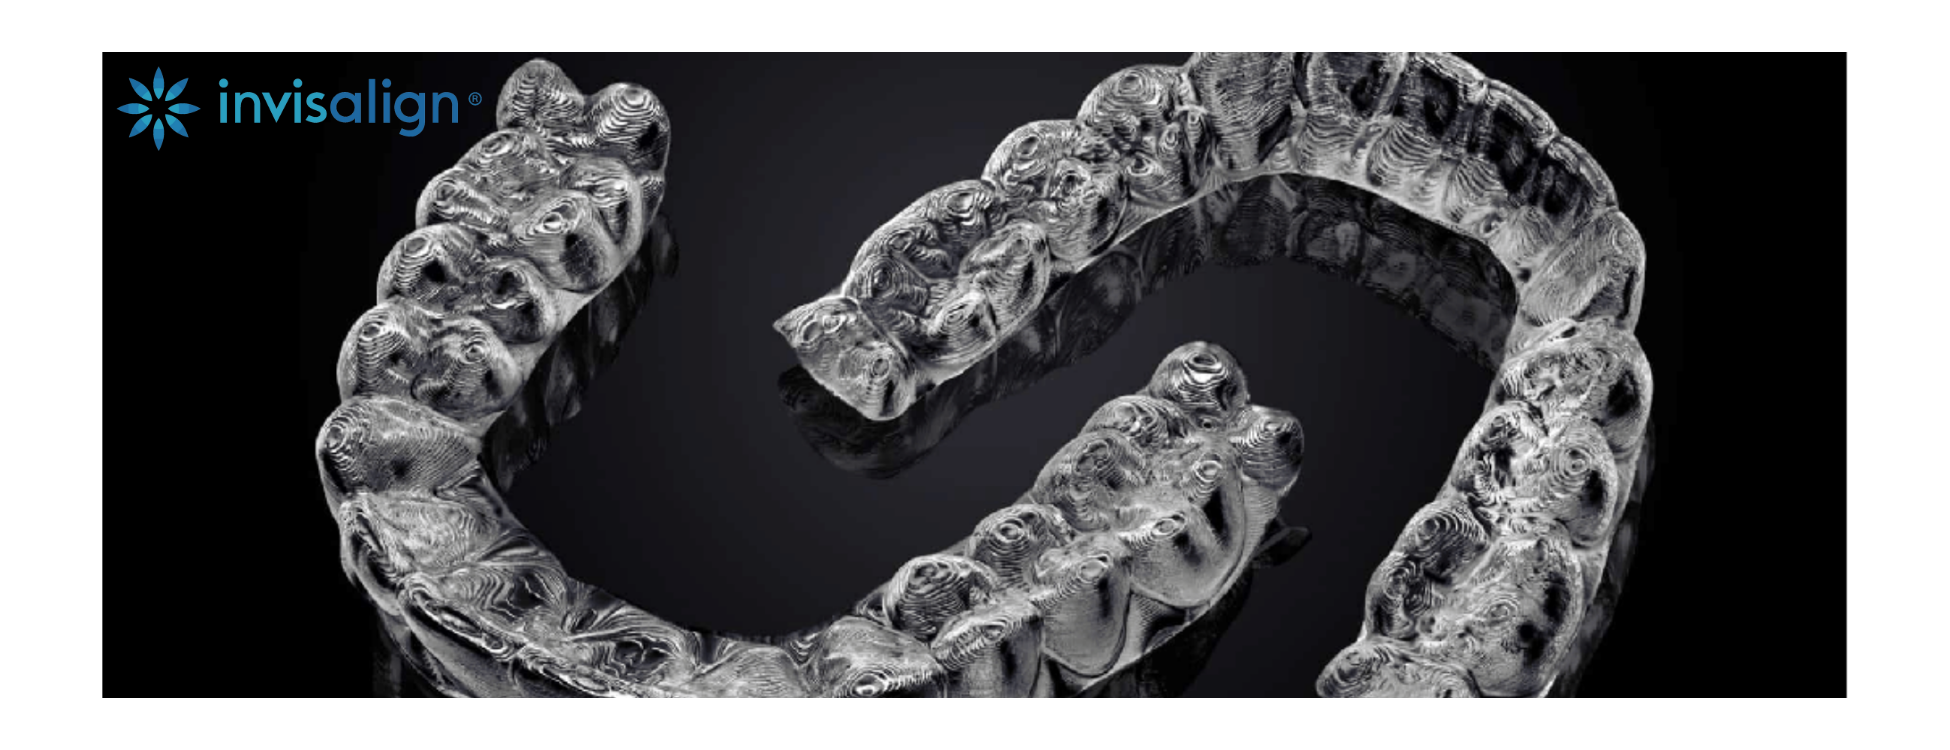 Invisialign clear aligners